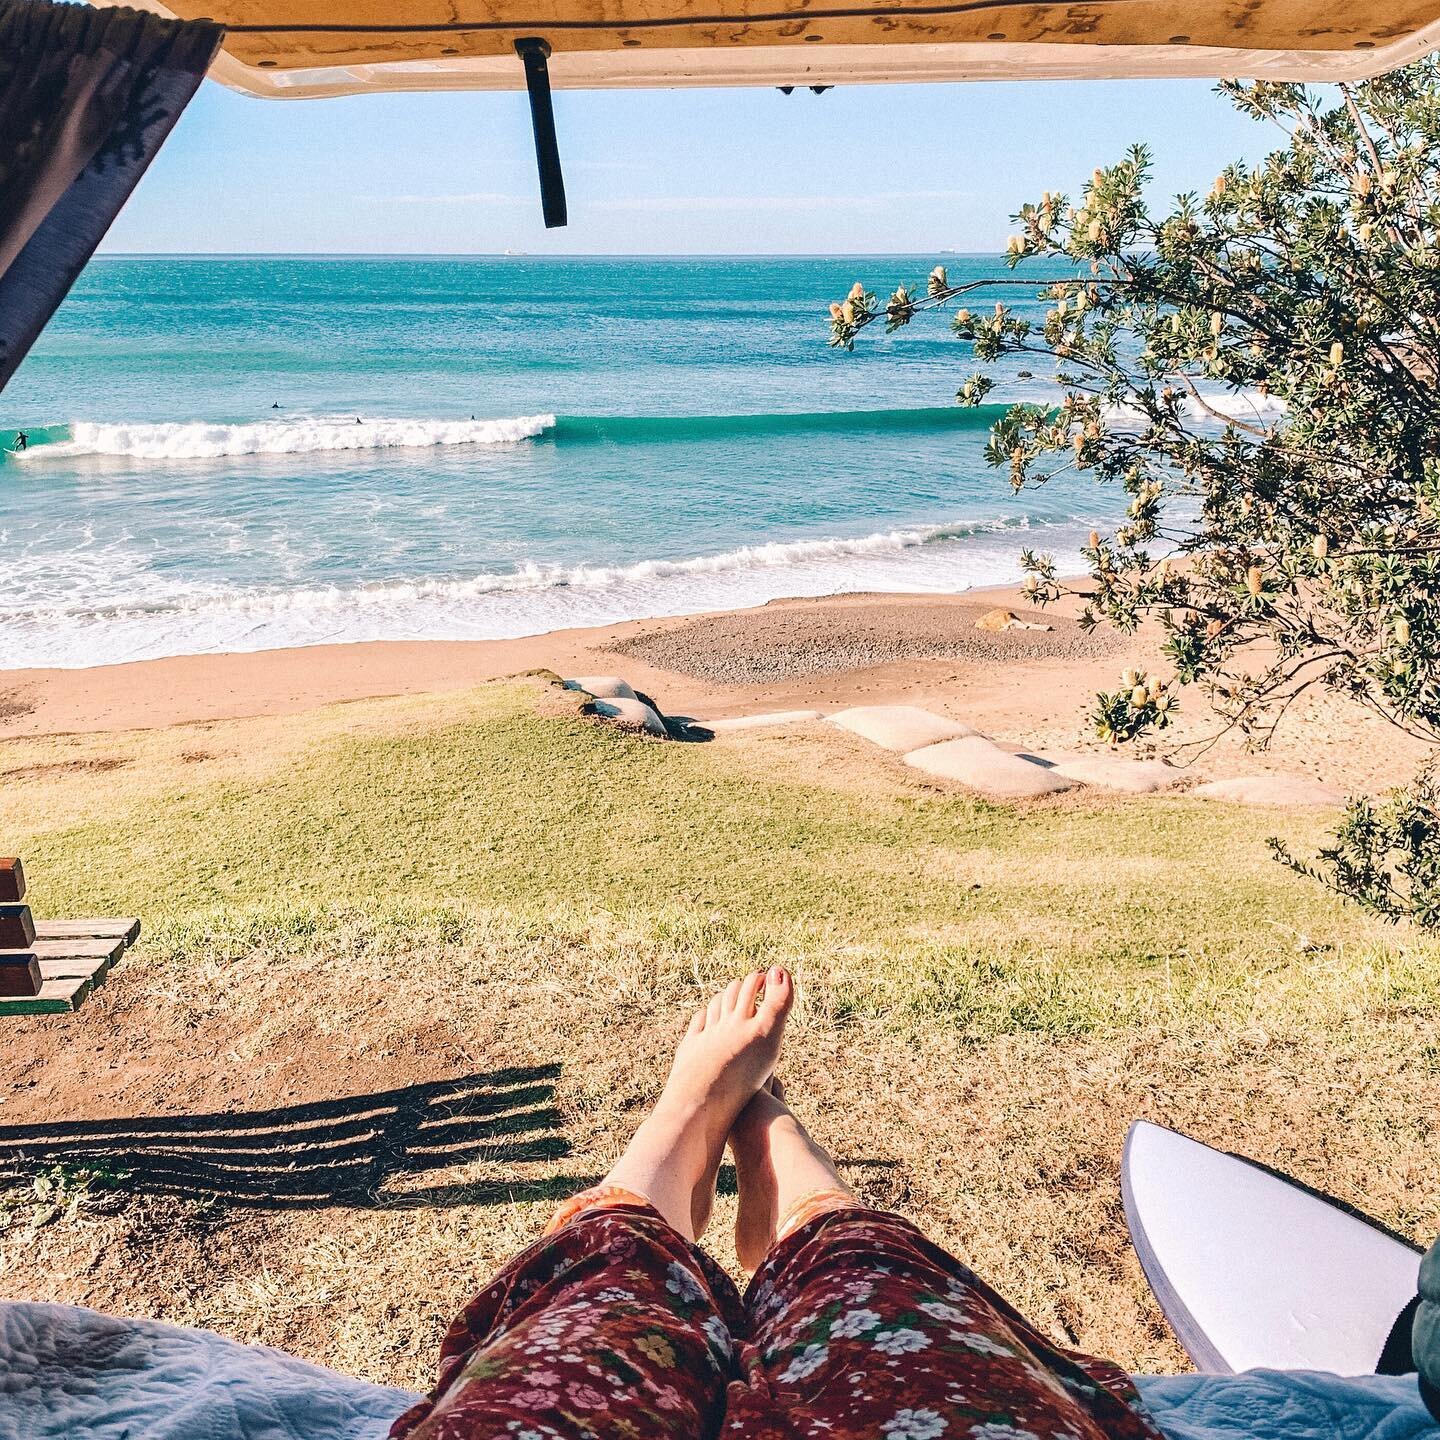 The smell of salty air, the breeze in your face and the comfort of your bed on wheels&hellip; Is what it&rsquo;s all about when it comes to Van Life. 🚐⠀⠀⠀⠀⠀⠀⠀⠀⠀
With summer holidays fast approaching, this month we're sharing some inspiration from th